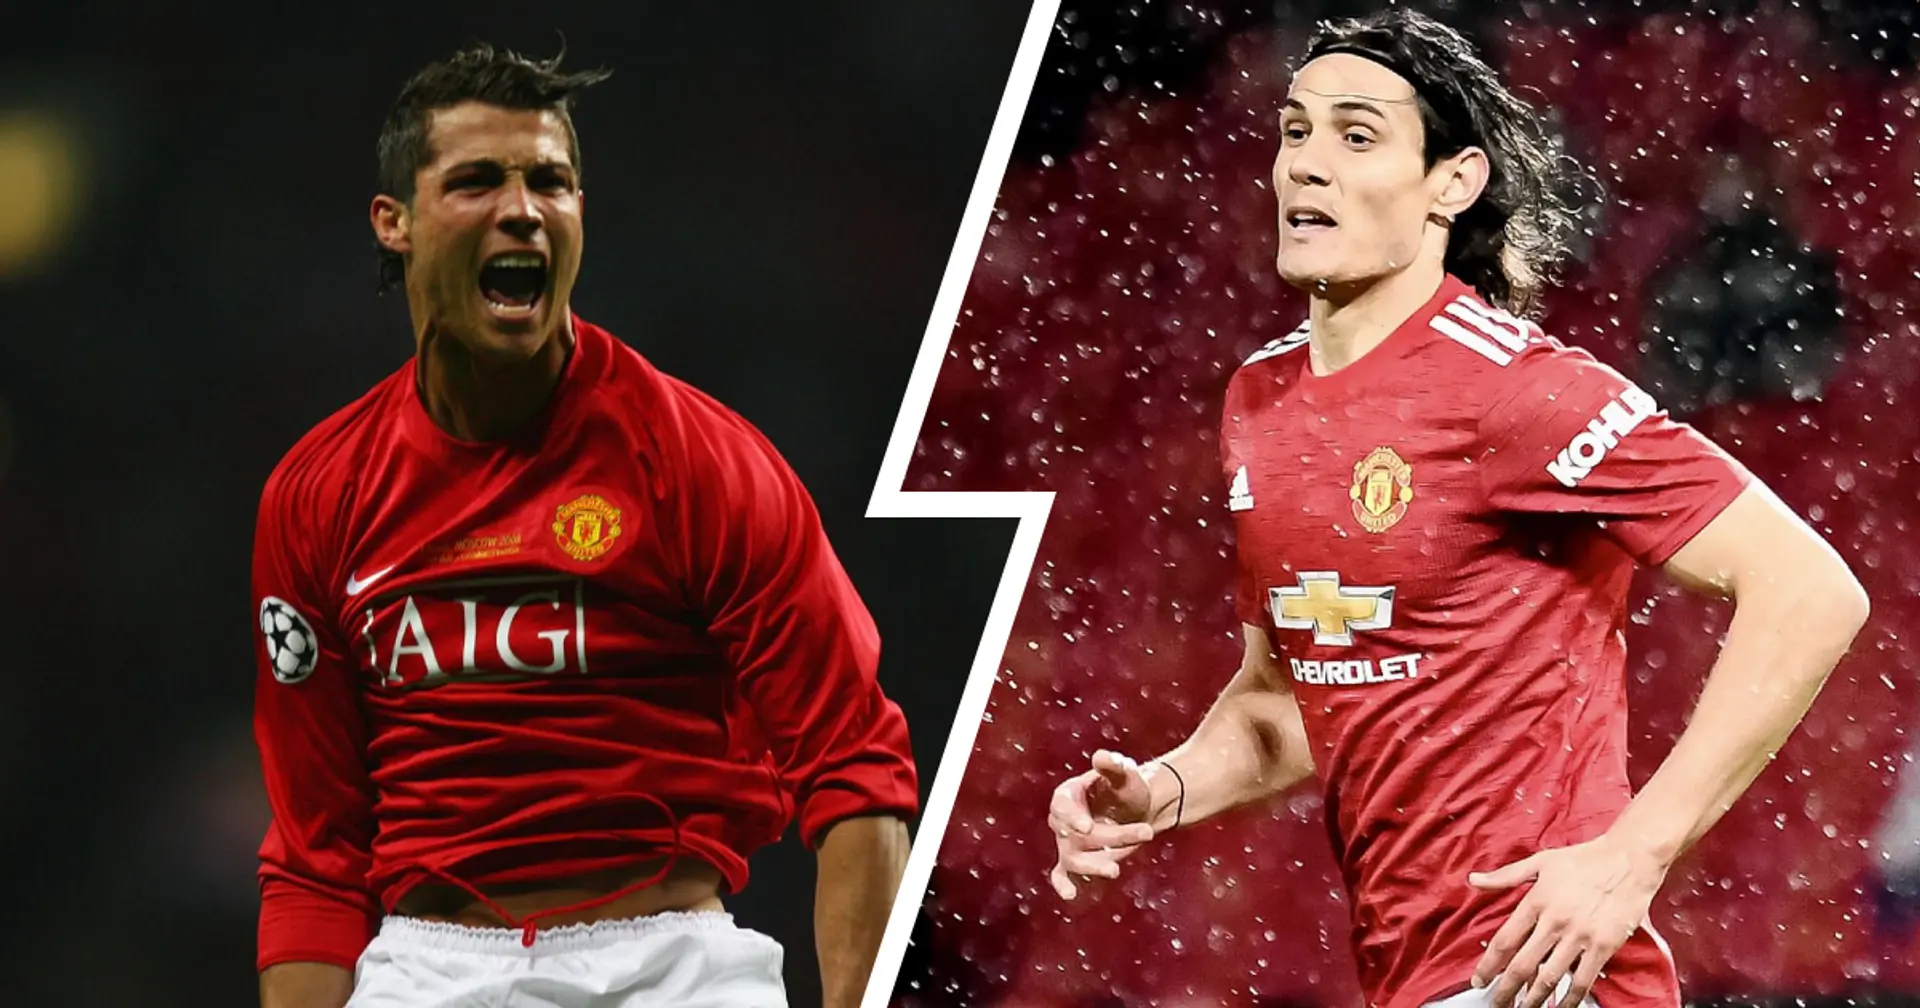 Cristiano, Cavani and 11 more: Man United legends and notable figures with birthdays in February